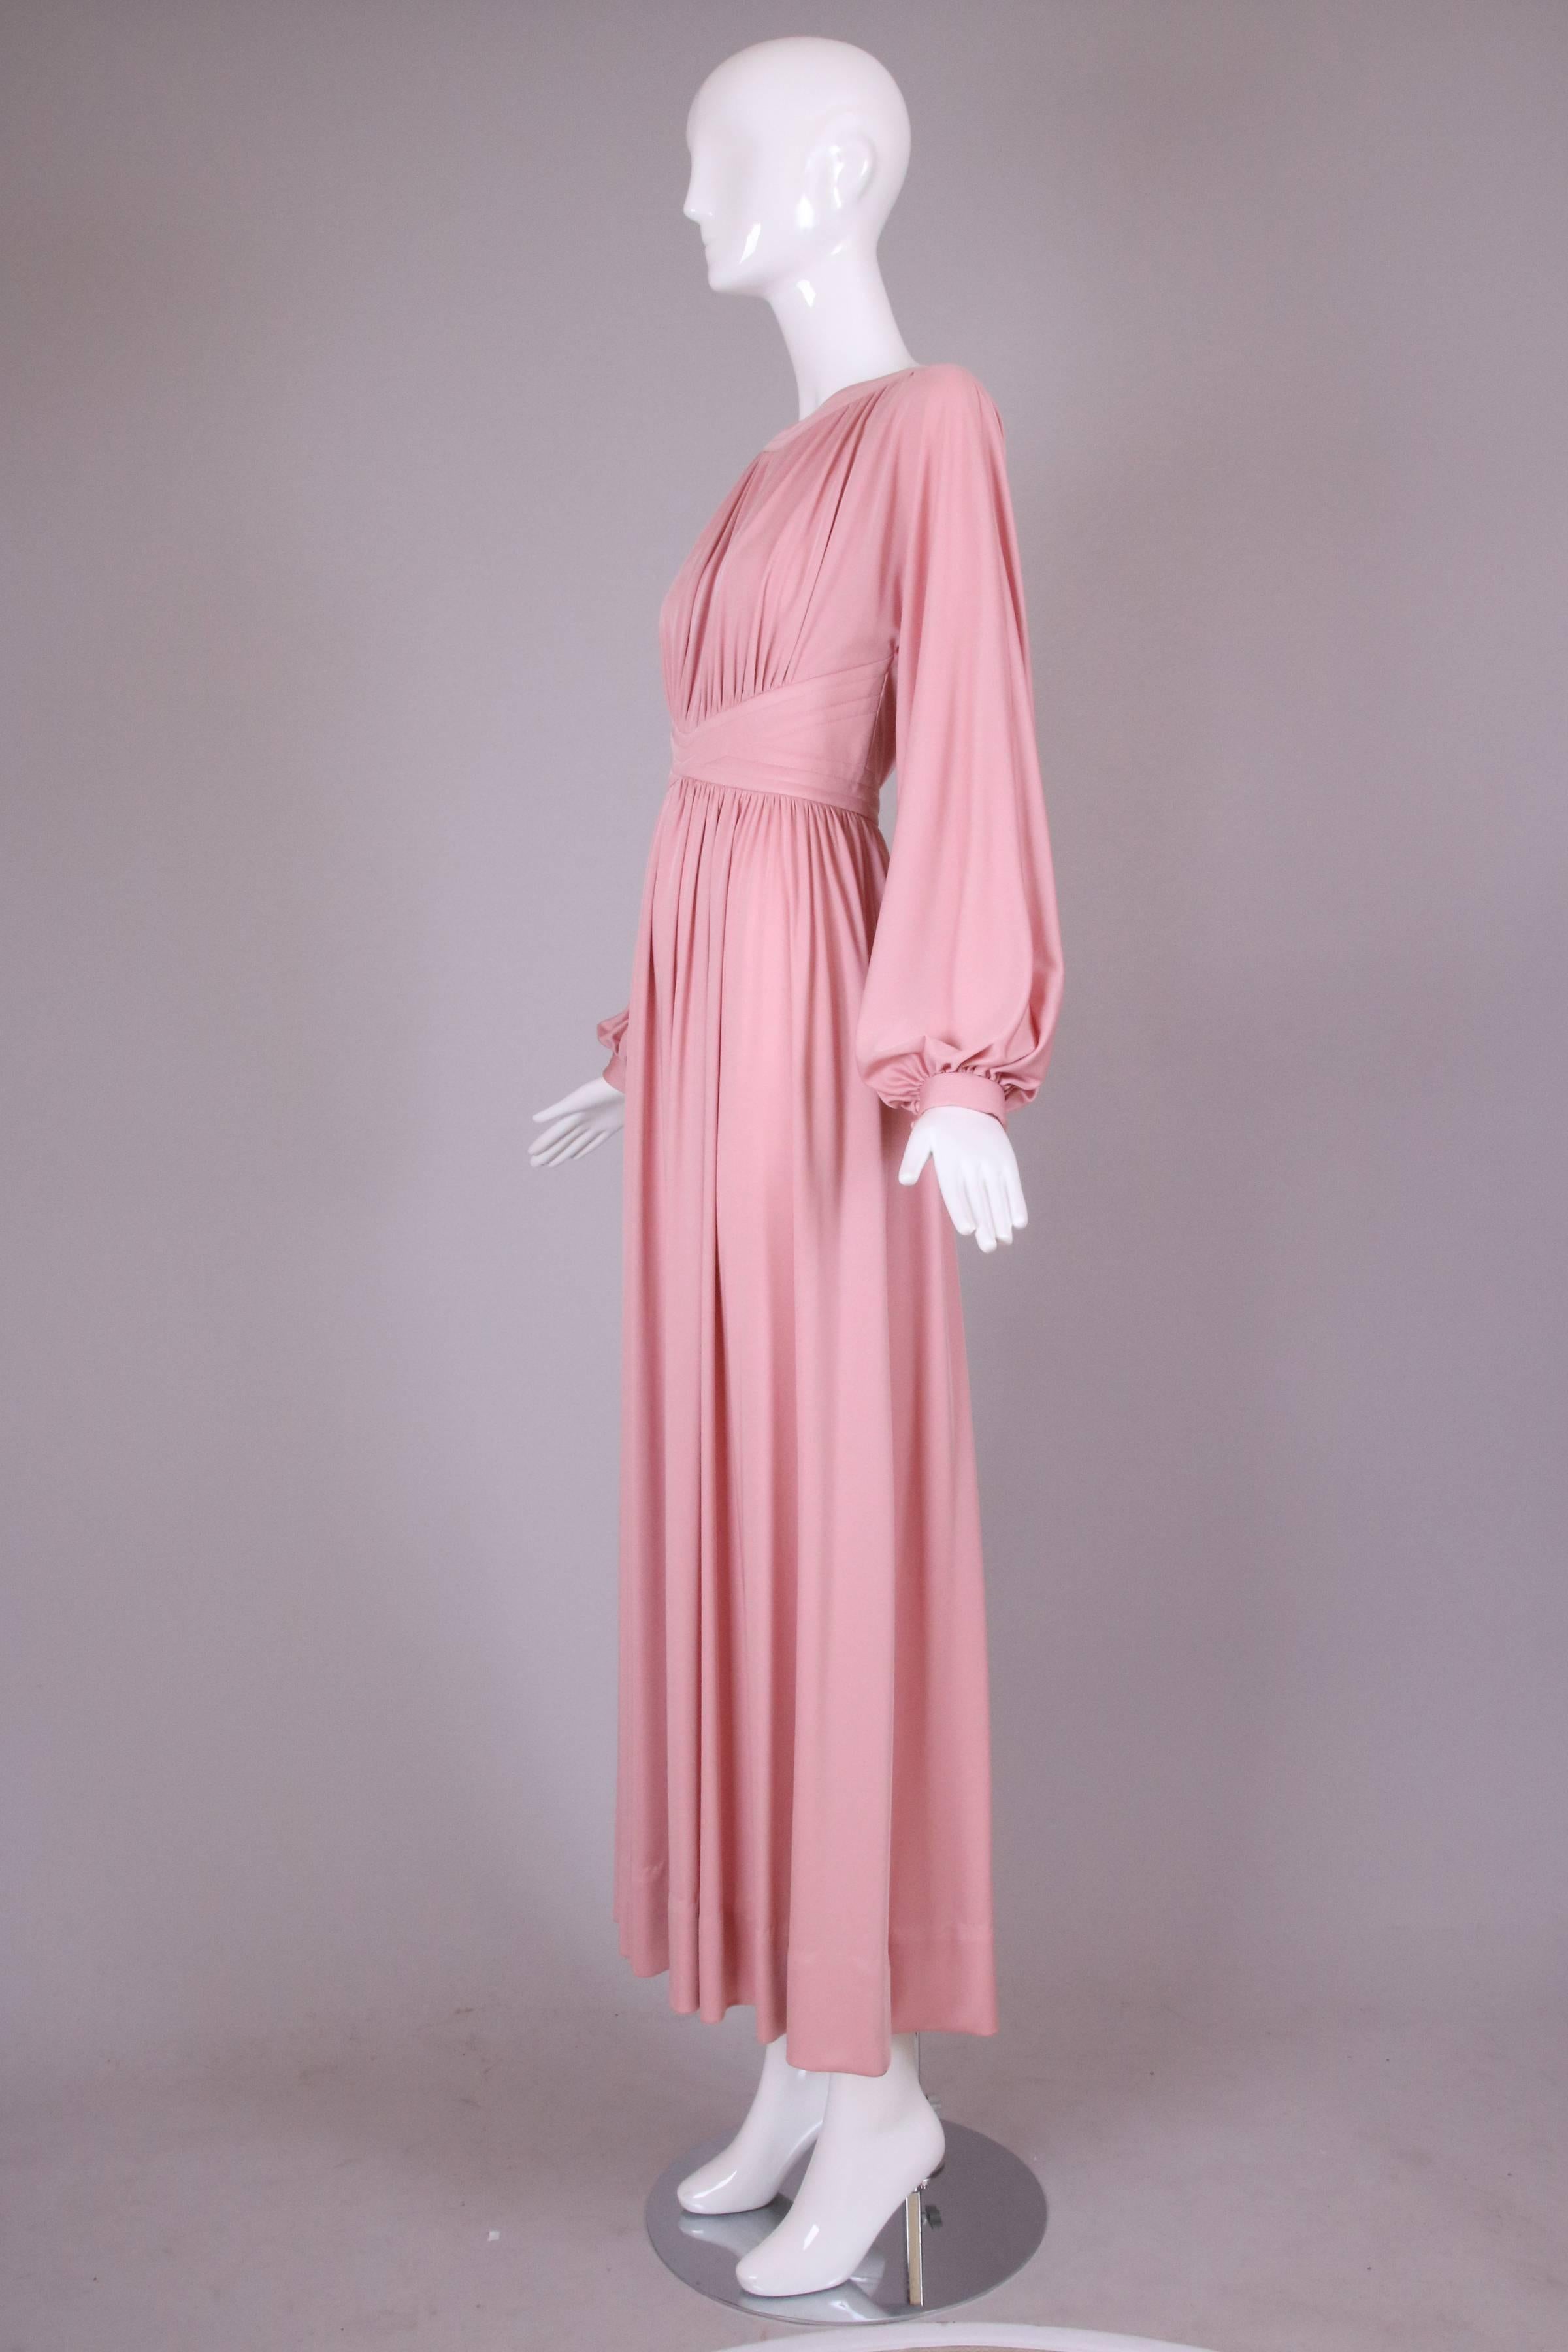 Donald Brooks rose pink jersey maxi dress with balloon sleeves. There is decorative top stitching at the waist band and neckline and high cut dolman armholes. The dress has  a zipper closure  at the back center and covered buttons at neck and waist.